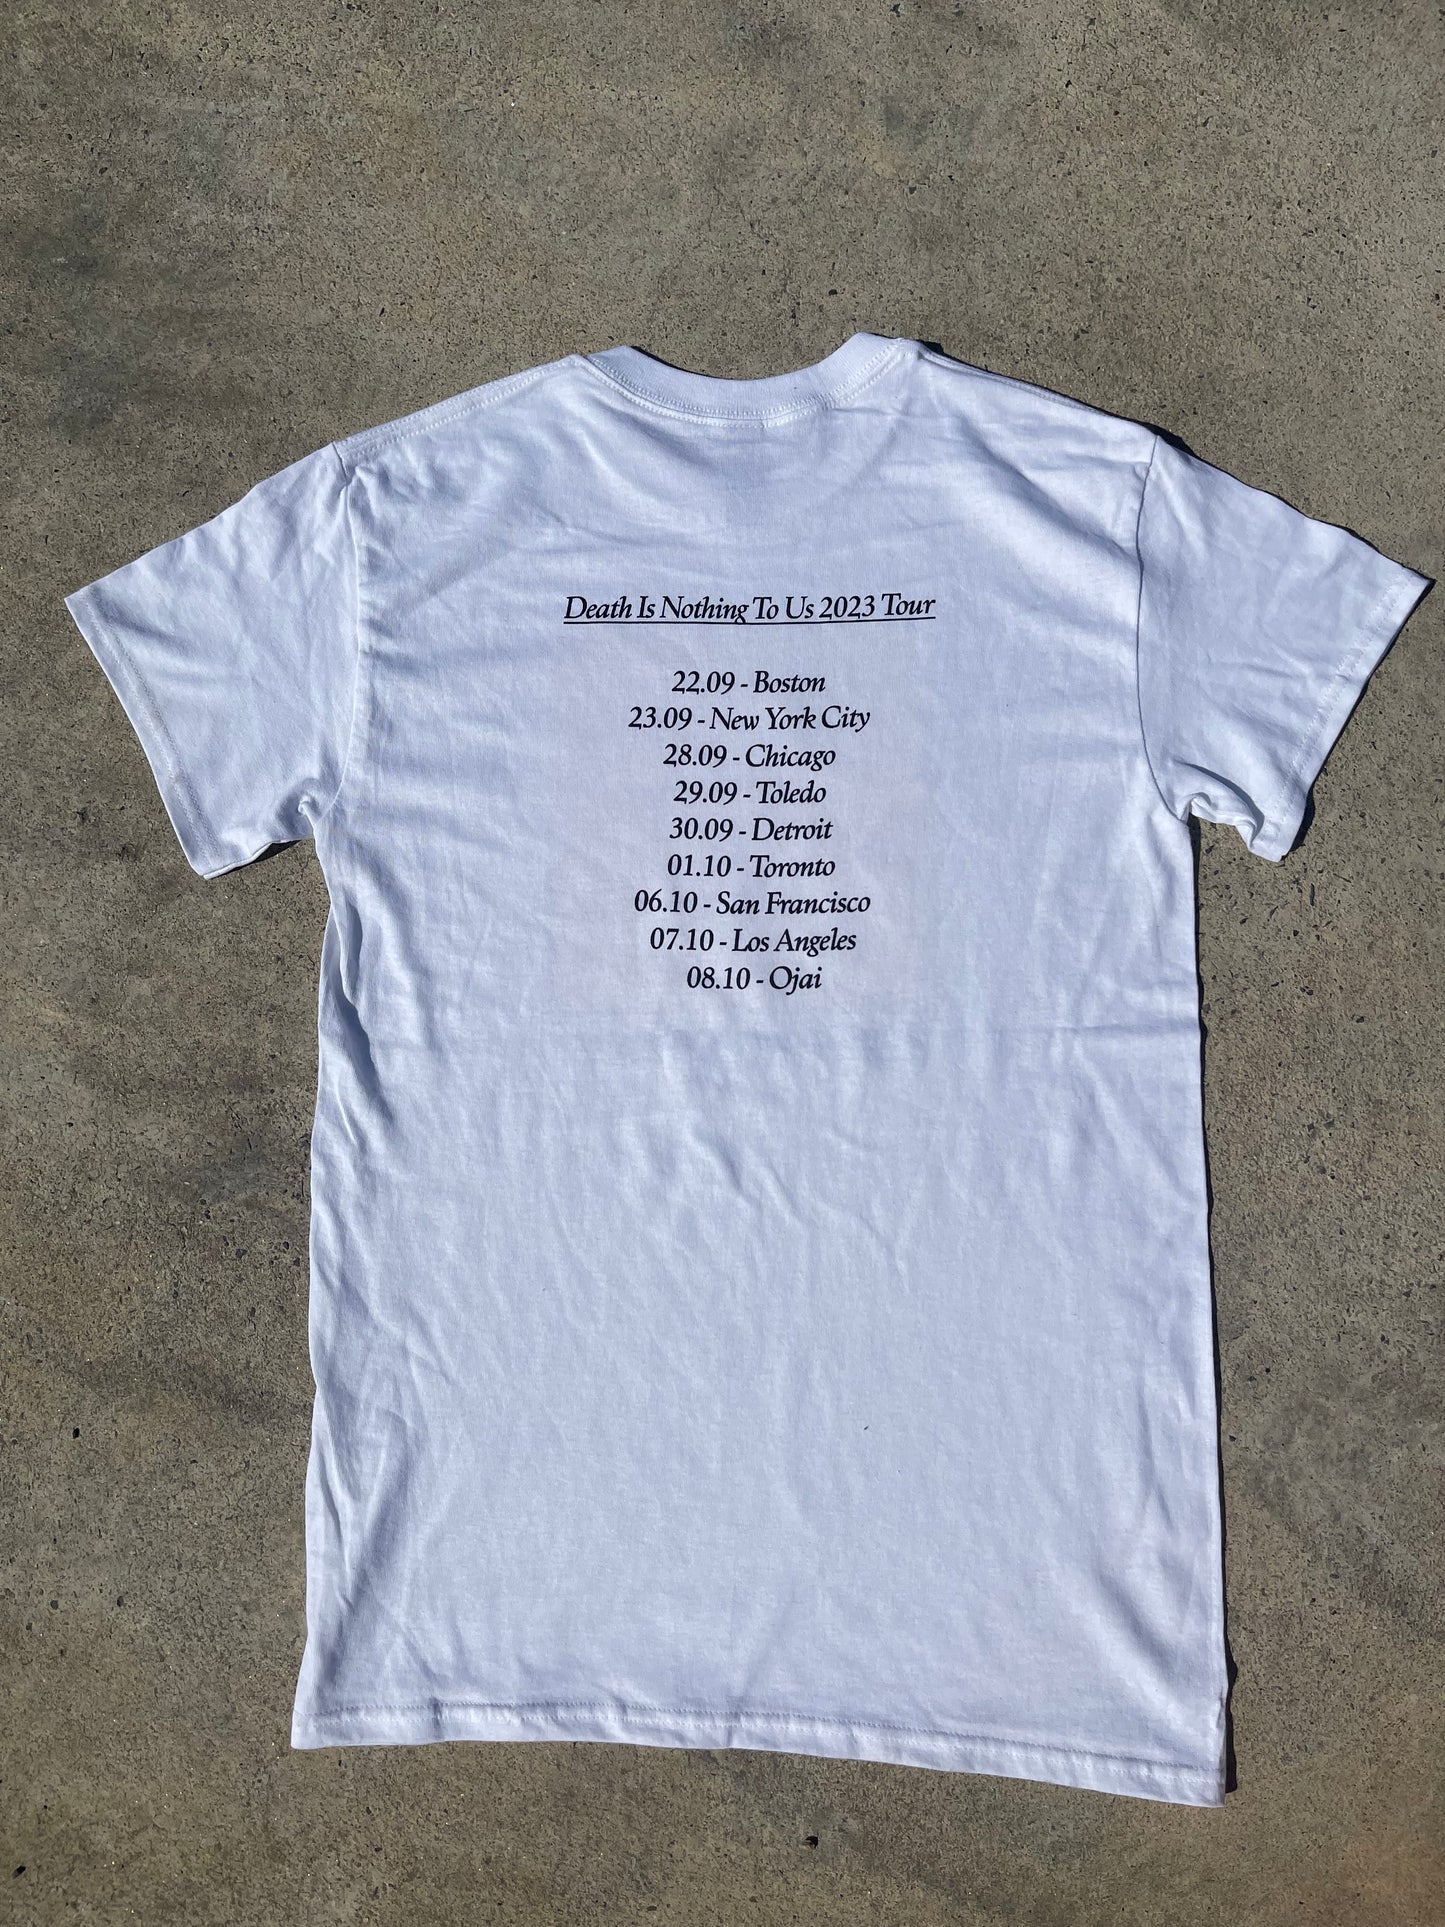 DINTU RECORD RELEASE TOUR TEE ON SALE $10 only!